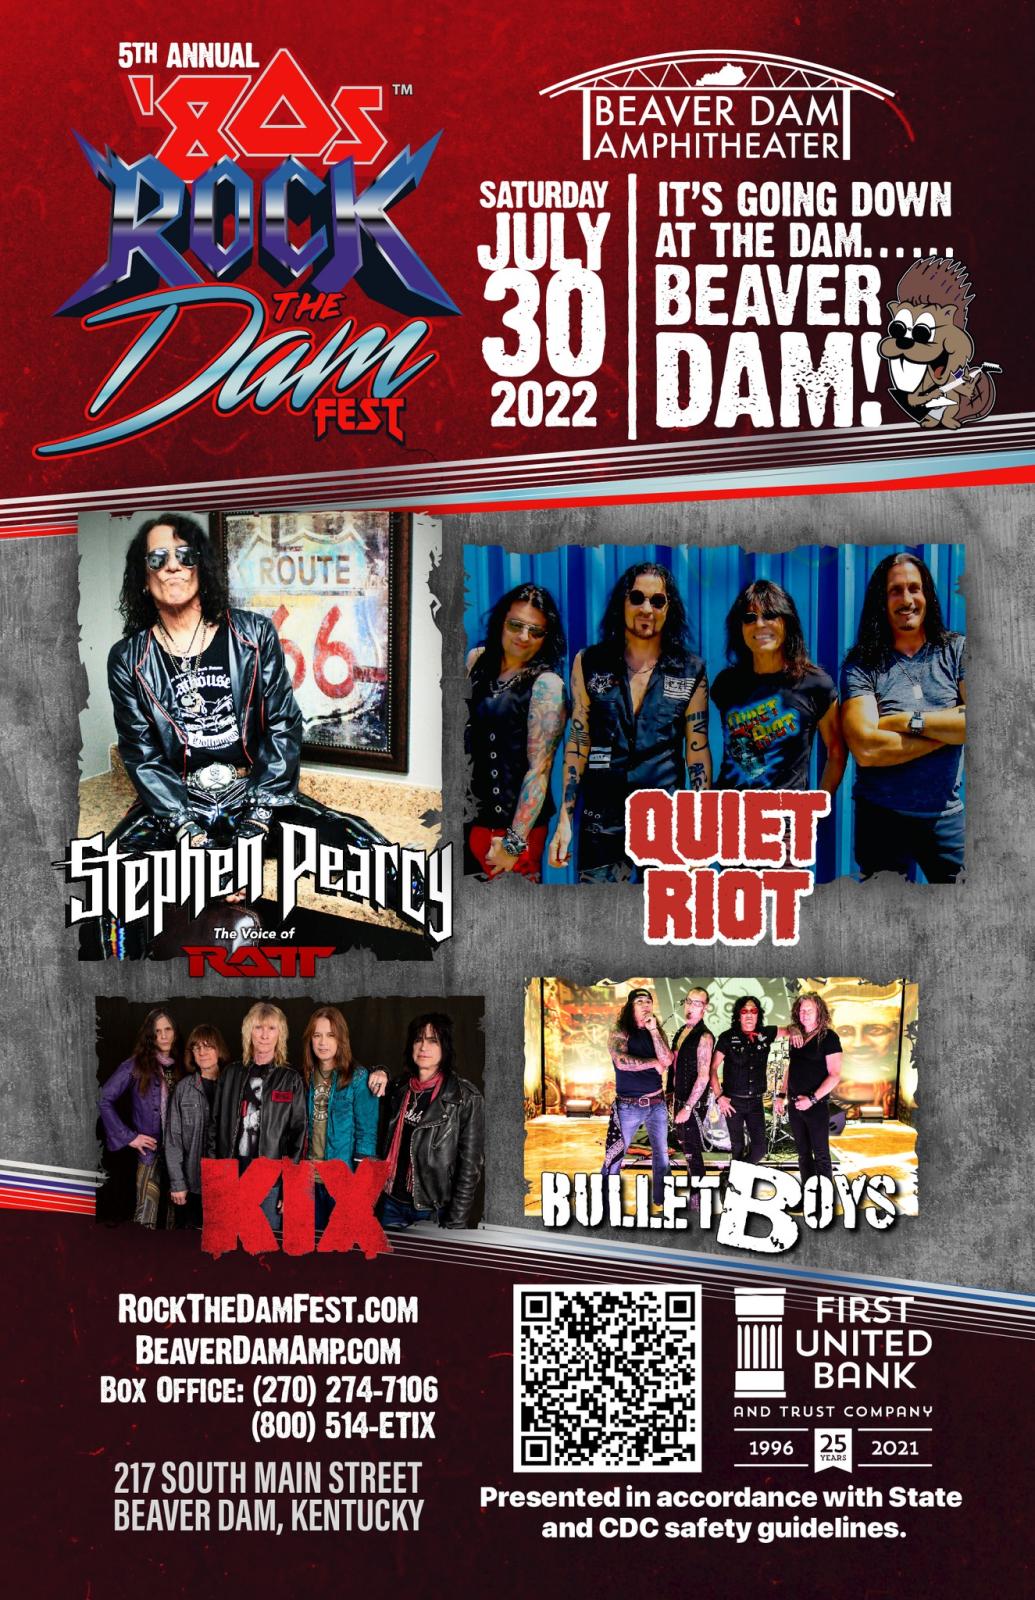 5th Annual Rock the DAM Concert Poster